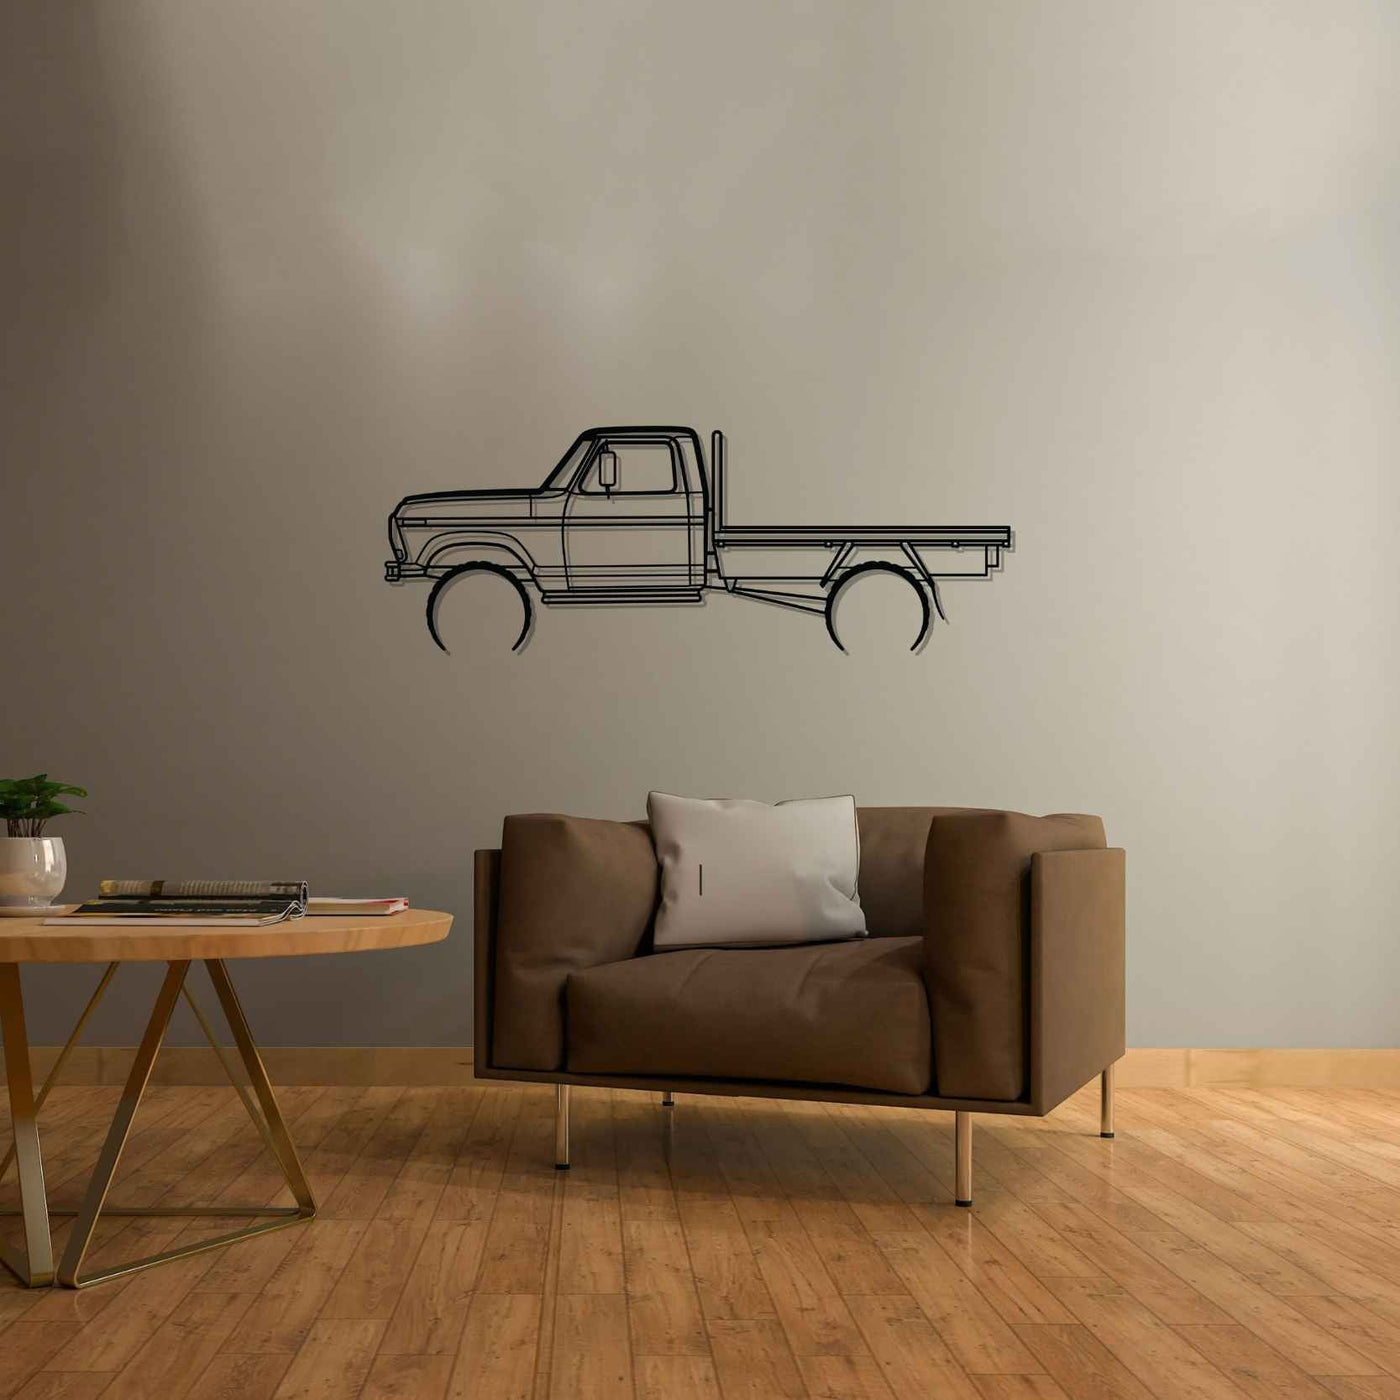 F100 Tray Back 1977 Detailed Silhouette Metal Wall Art